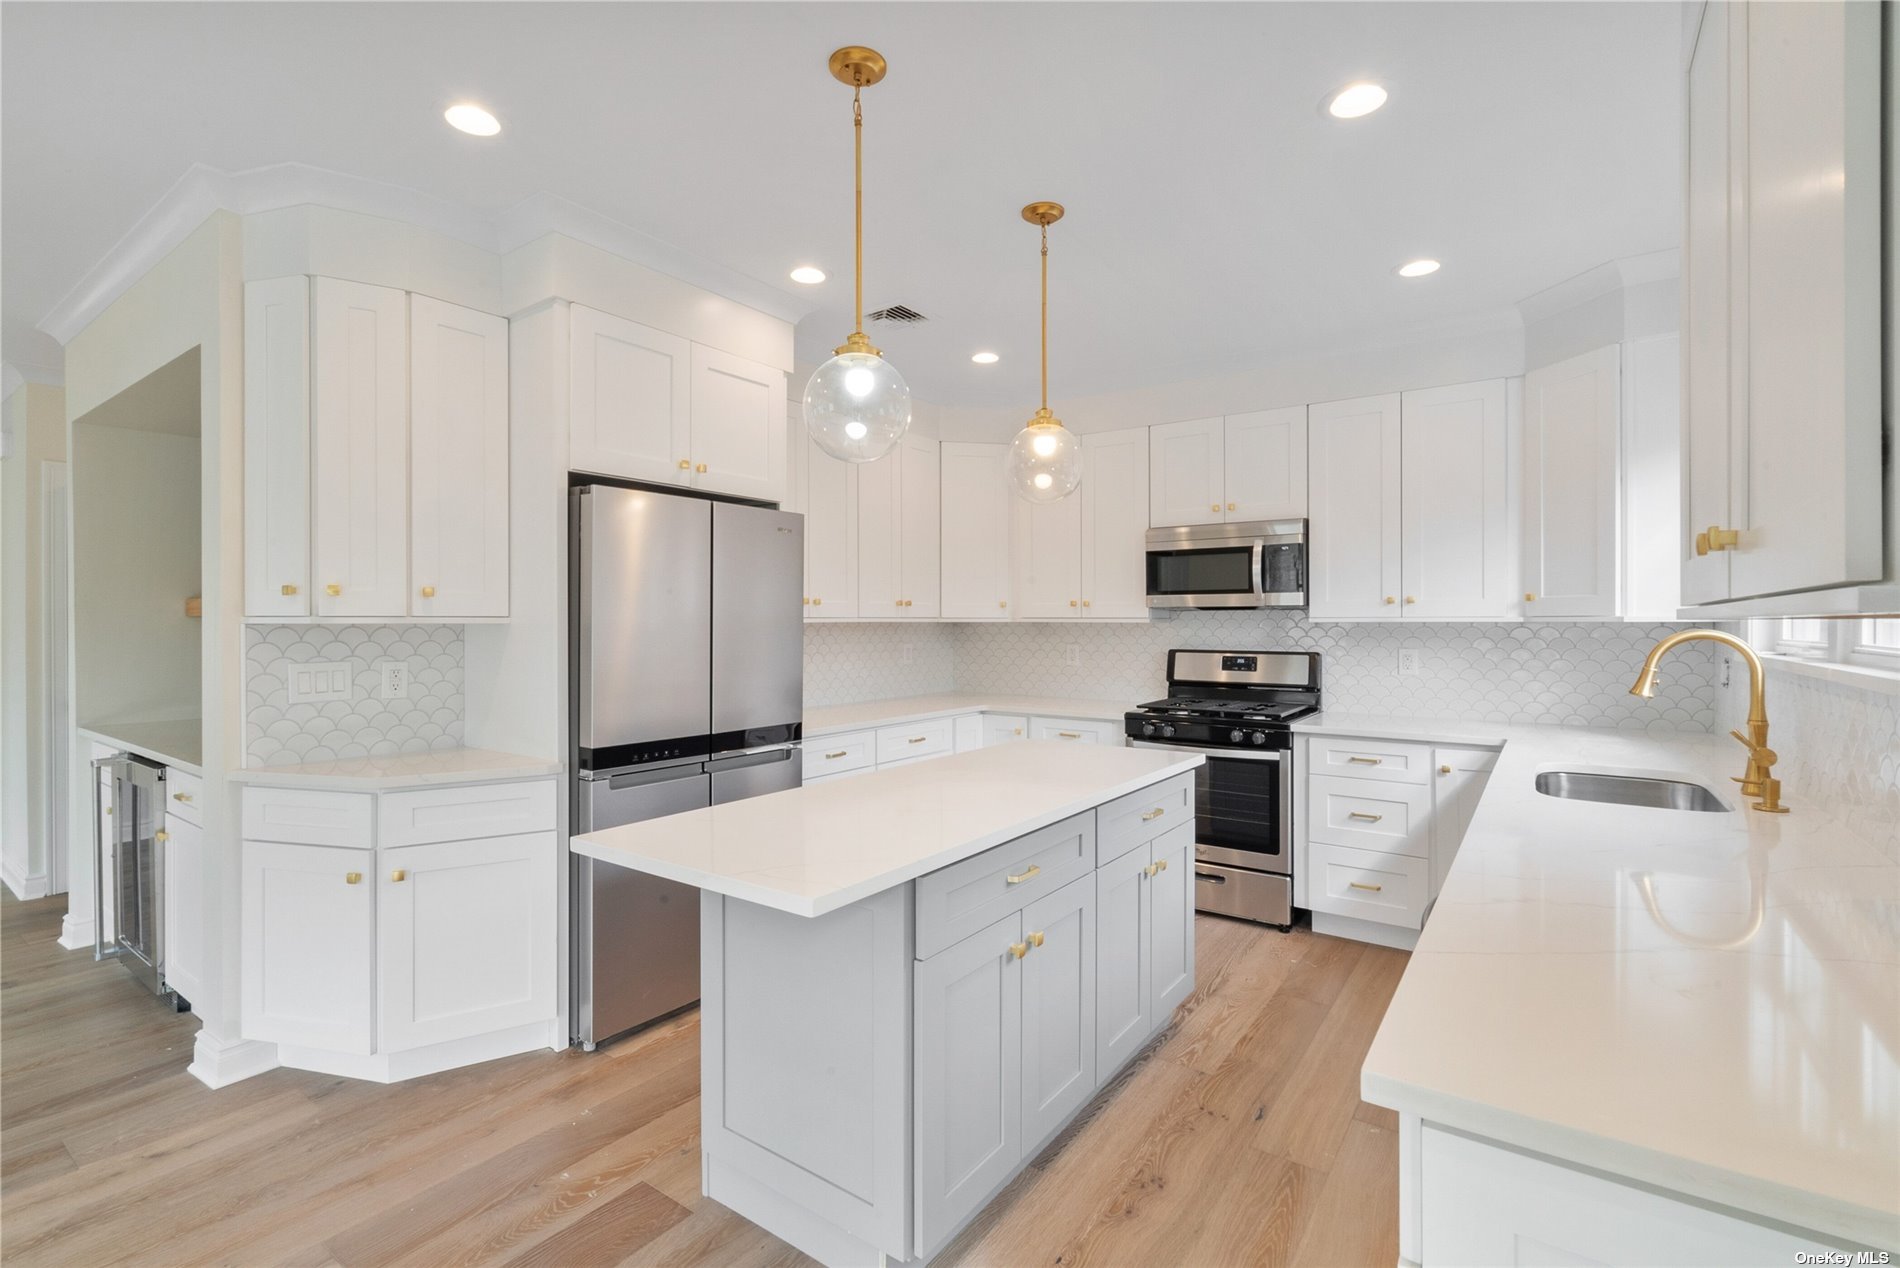 a kitchen with kitchen island a white counter top space cabinets and stainless steel appliances